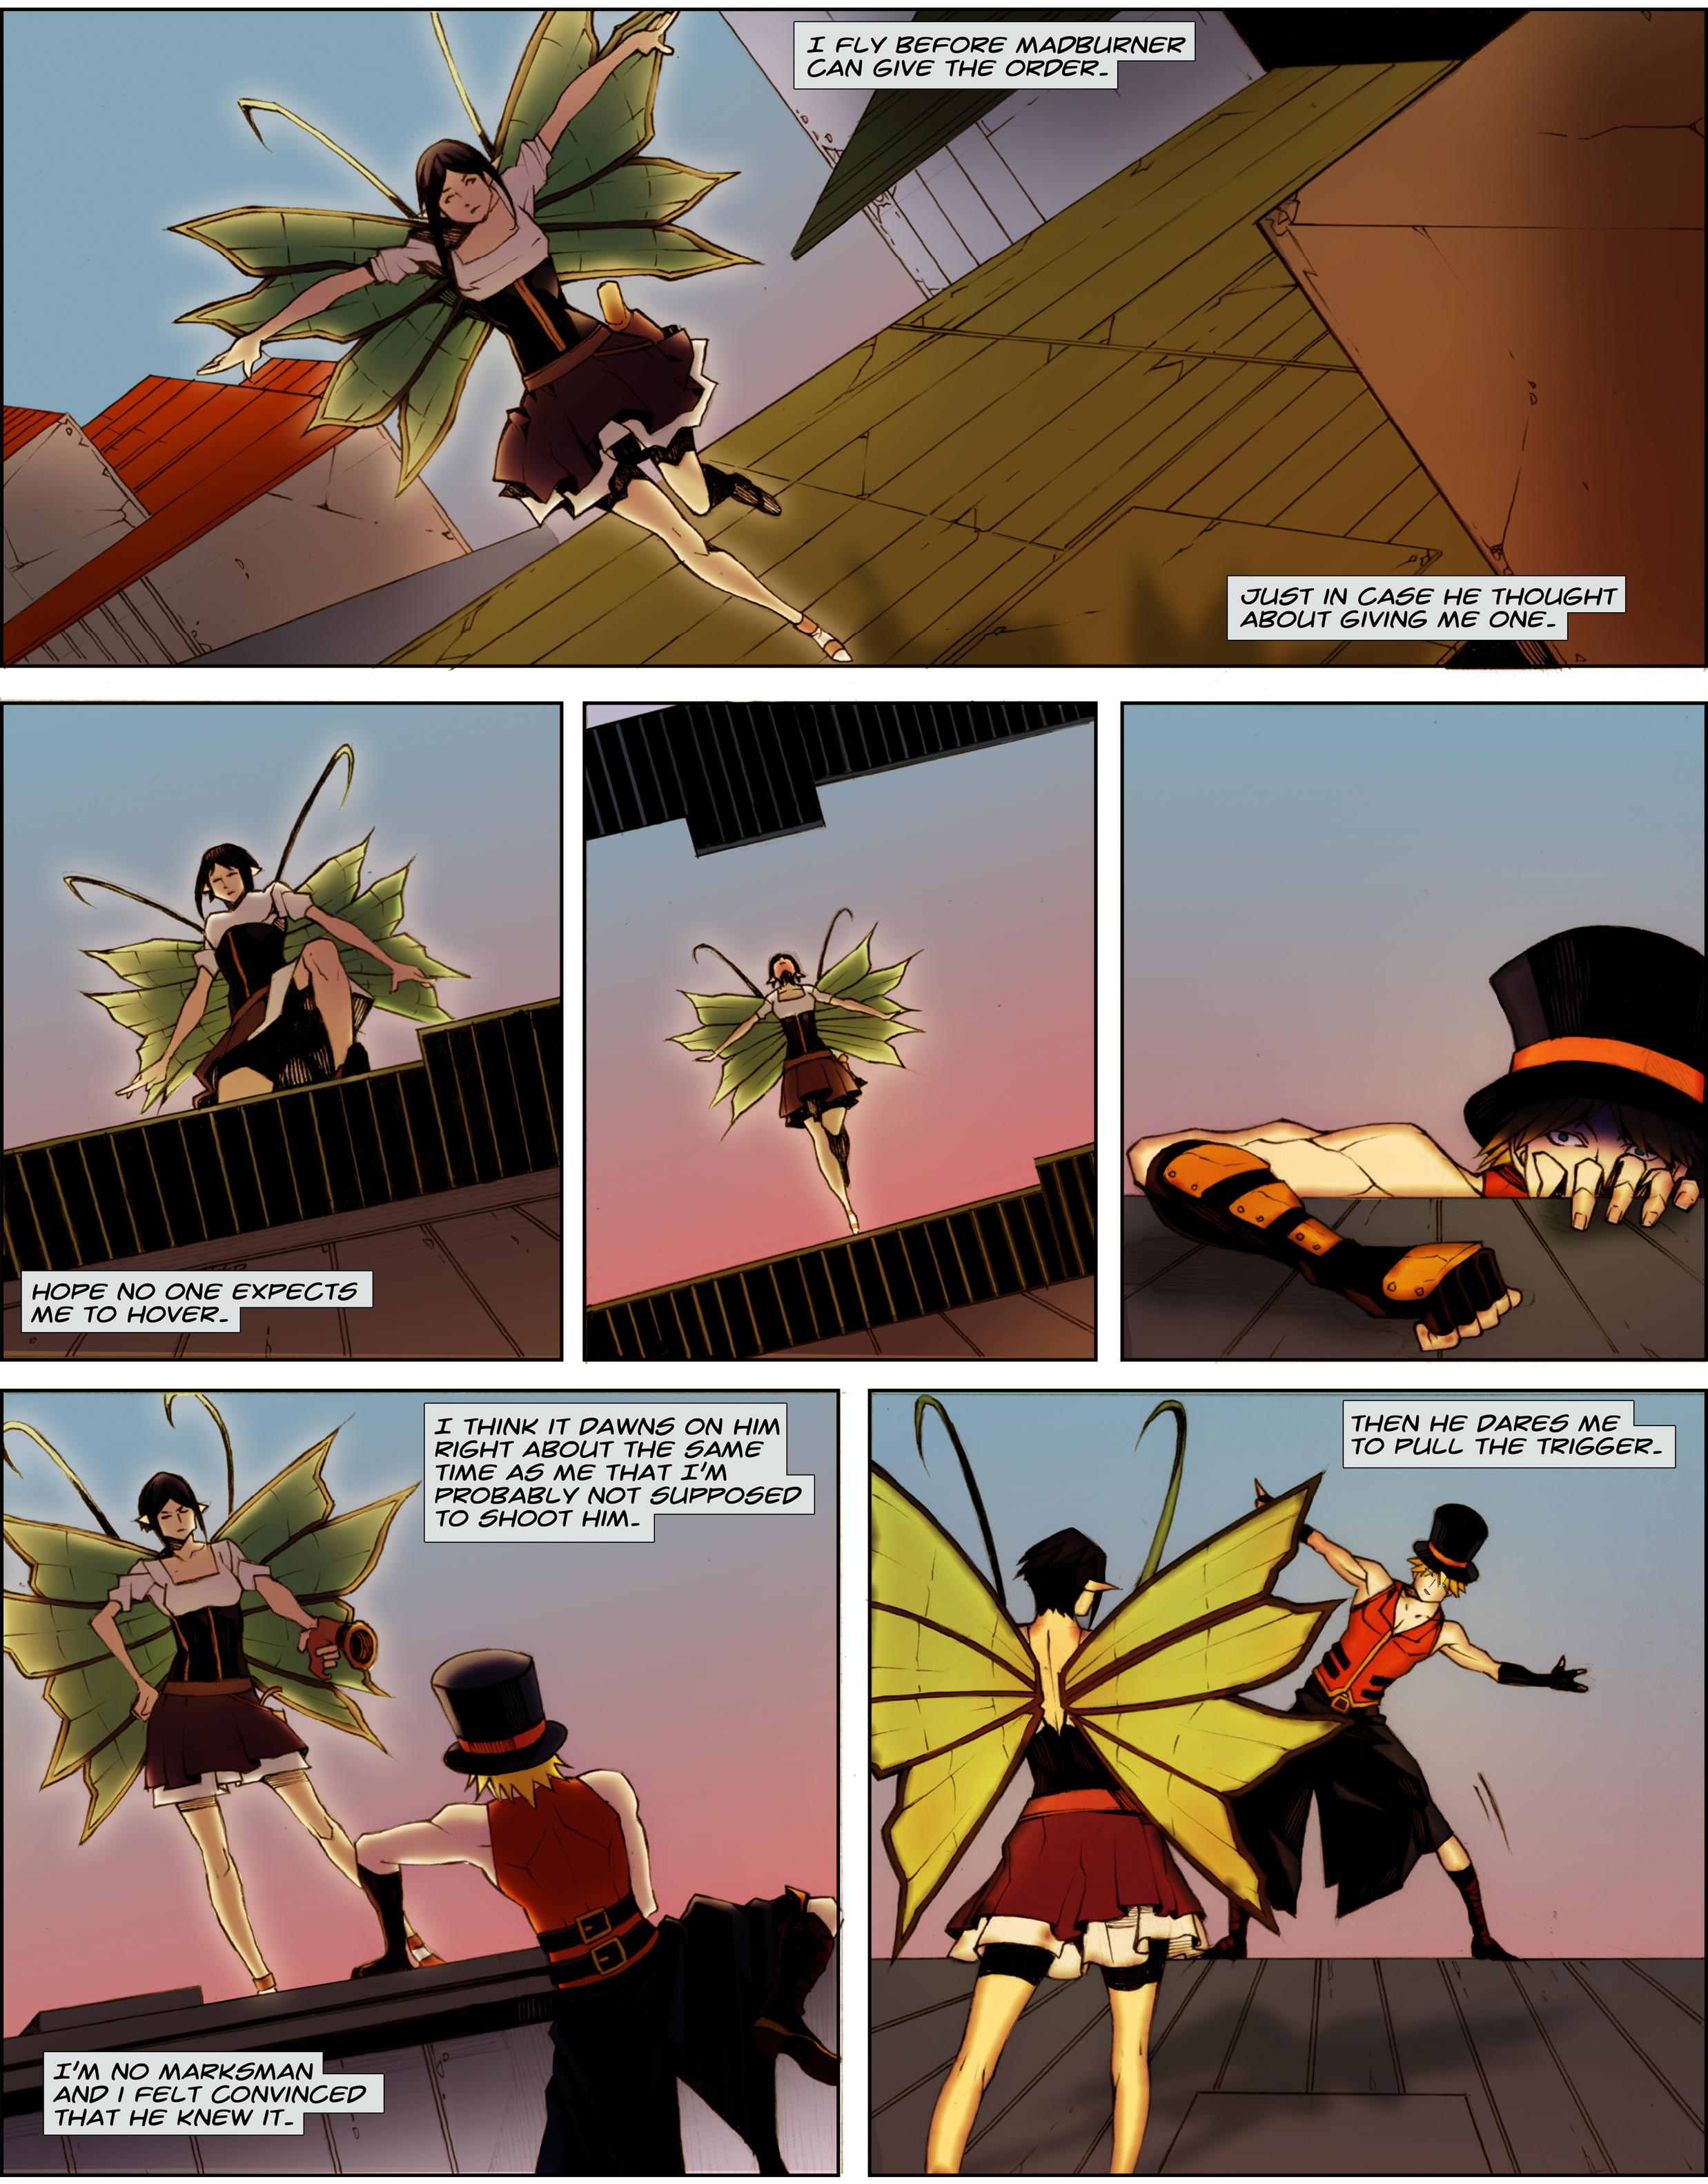 Chapter 7, Page 5